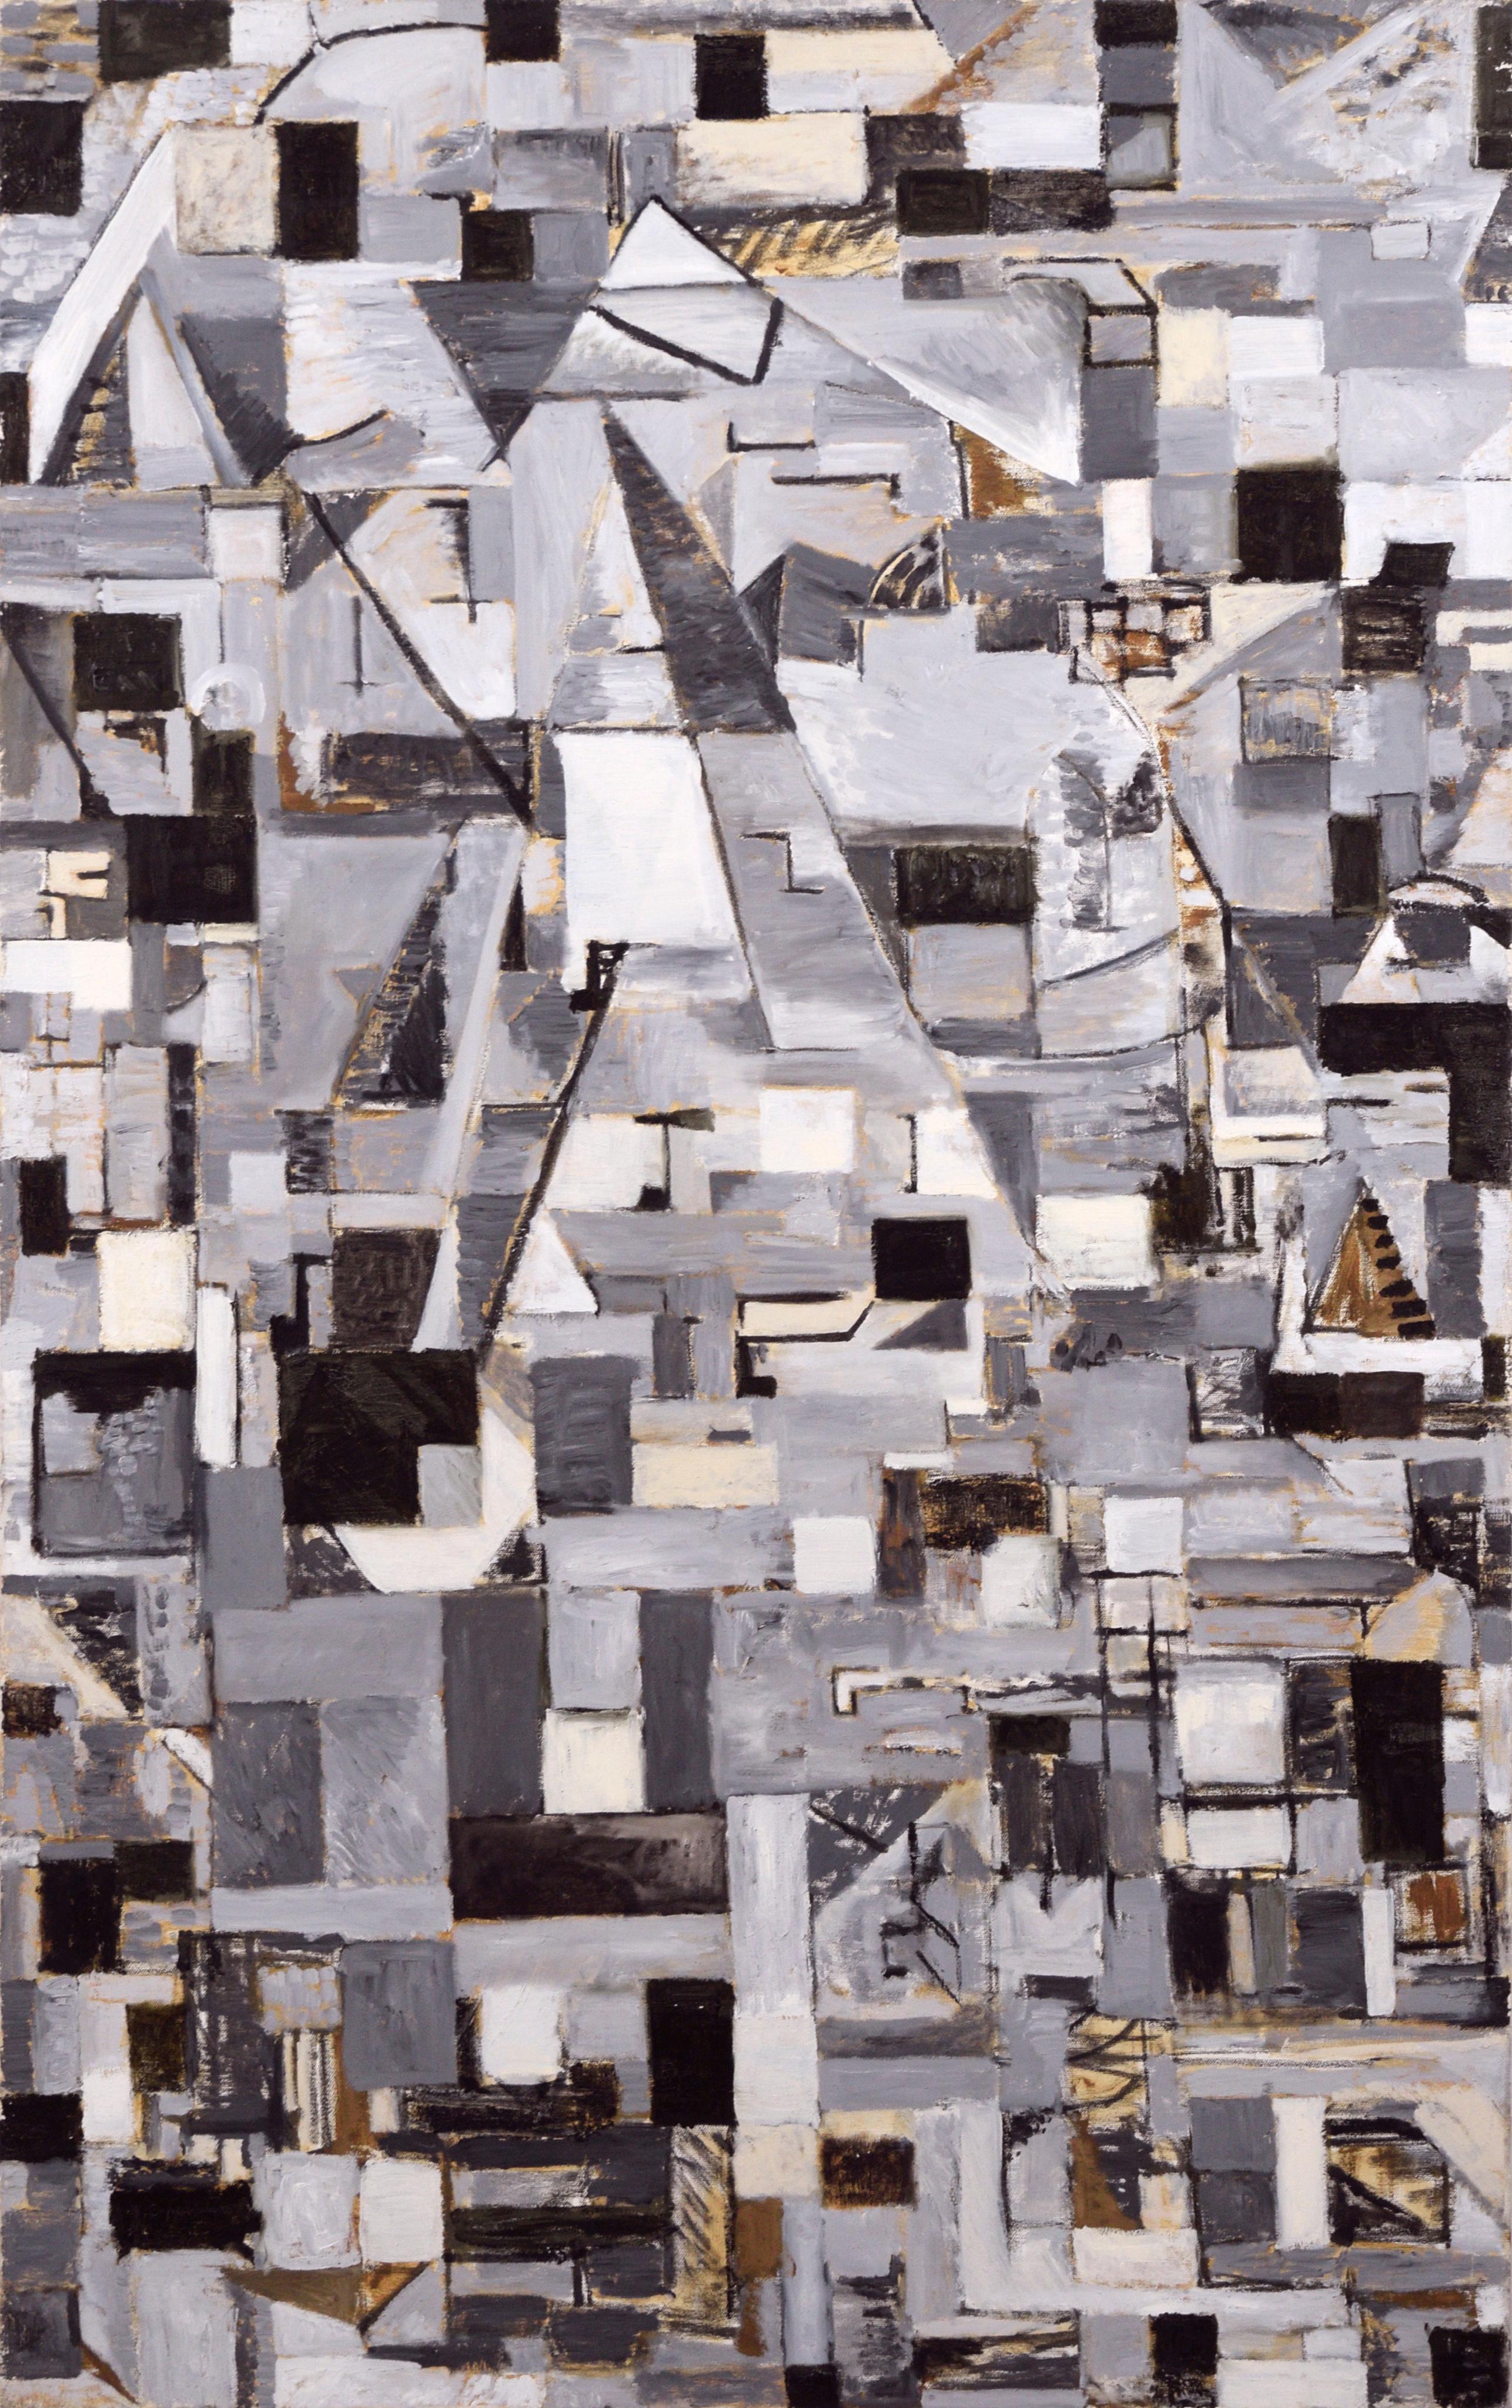 Grayscale Cubist Abstract with Brown Accents